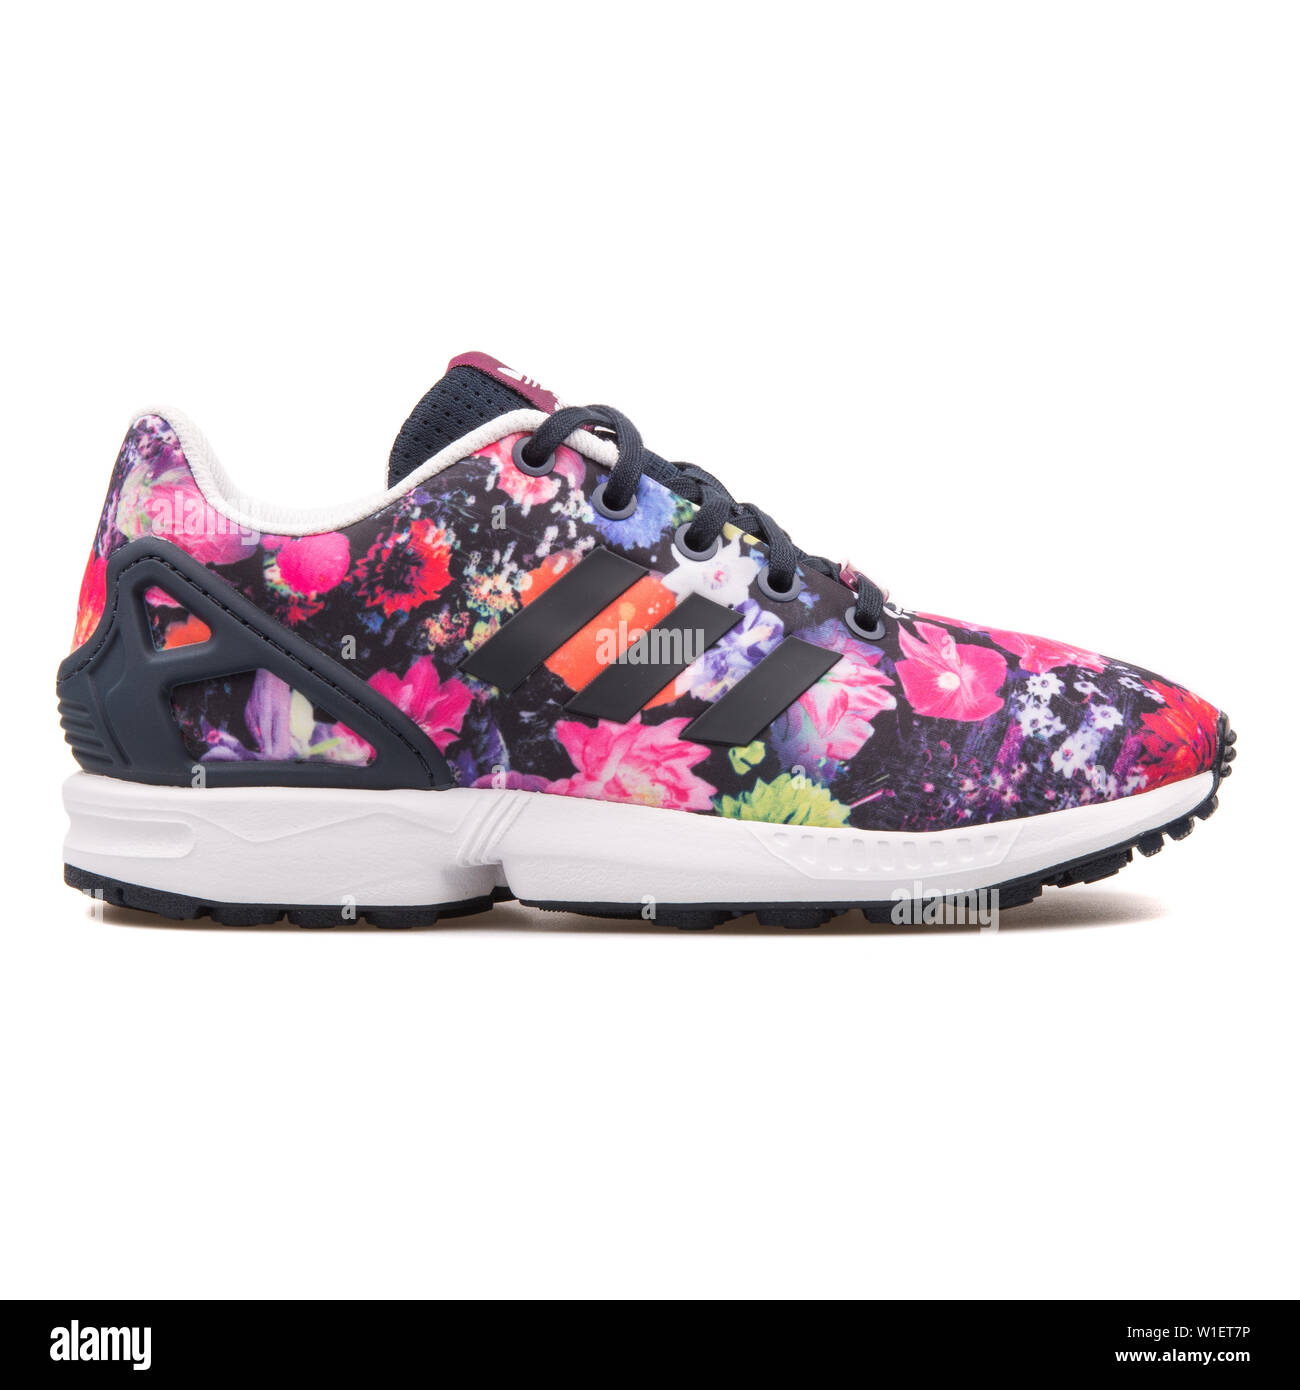 AUSTRIA AUGUST 2017: Adidas ZX Flux black and multi color floral print sneaker on background Stock Photo - Alamy